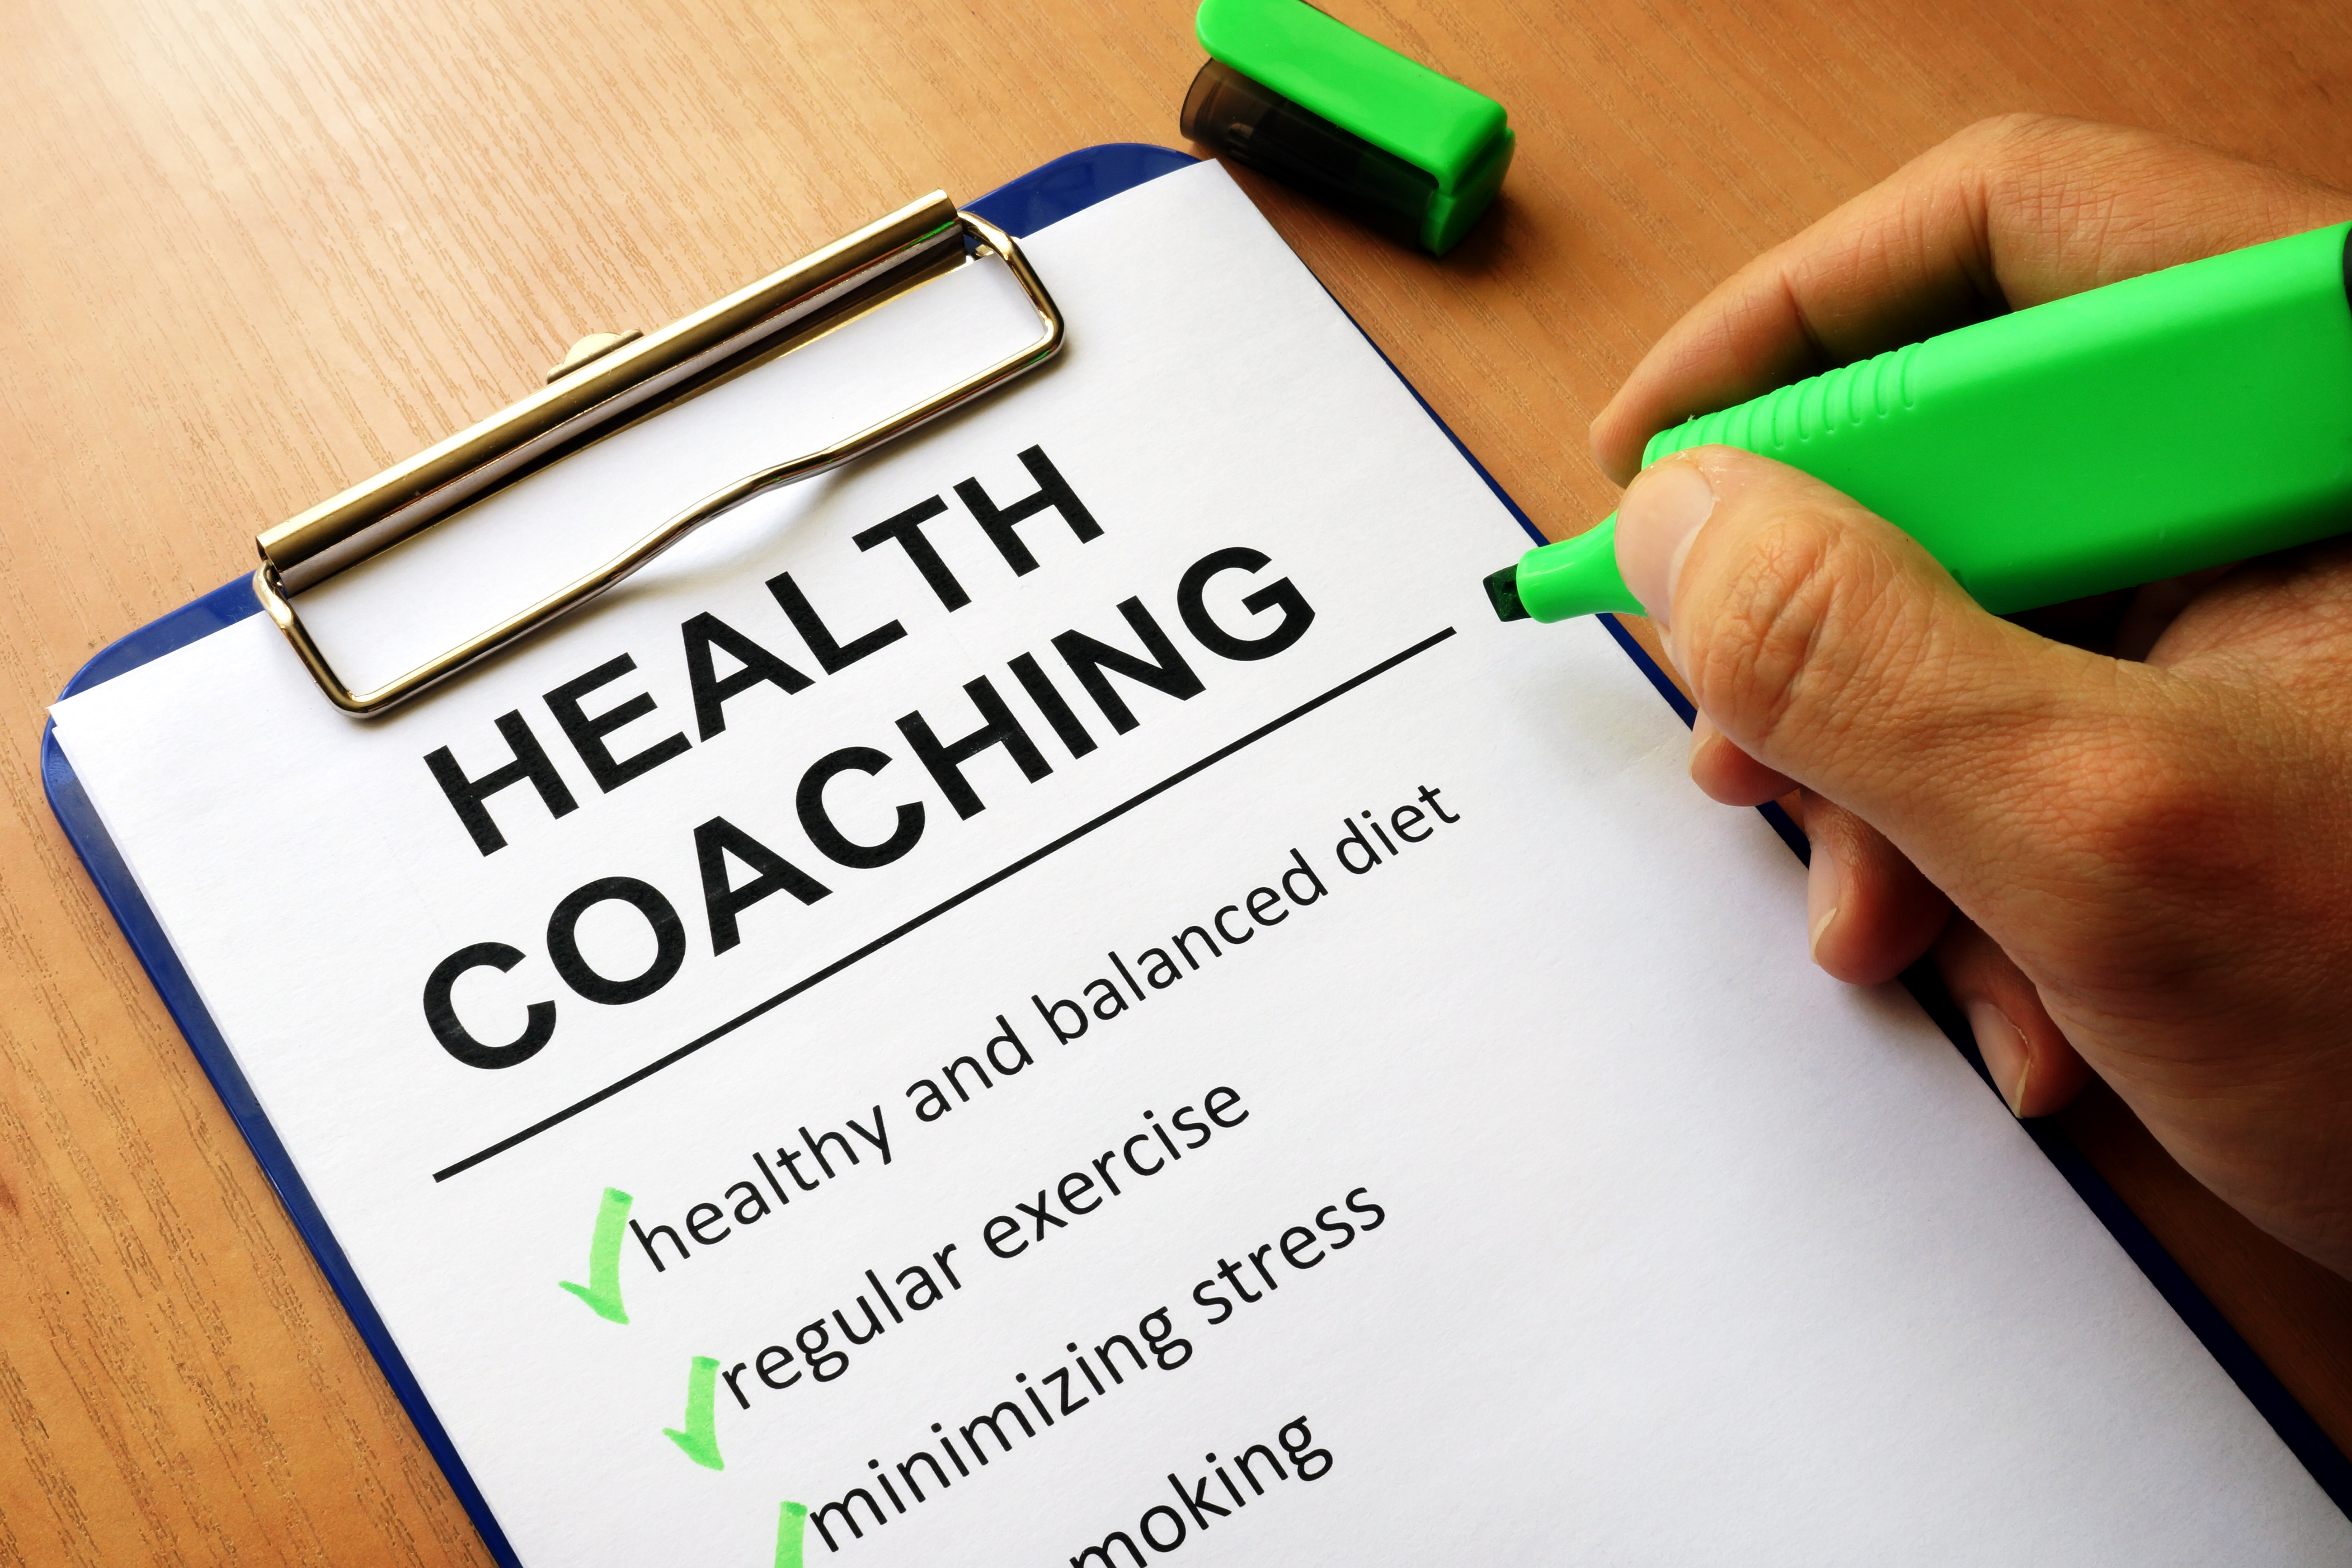 Health Coach Legal Package - image shutterstock_657955471-1 on https://docuhealth.com